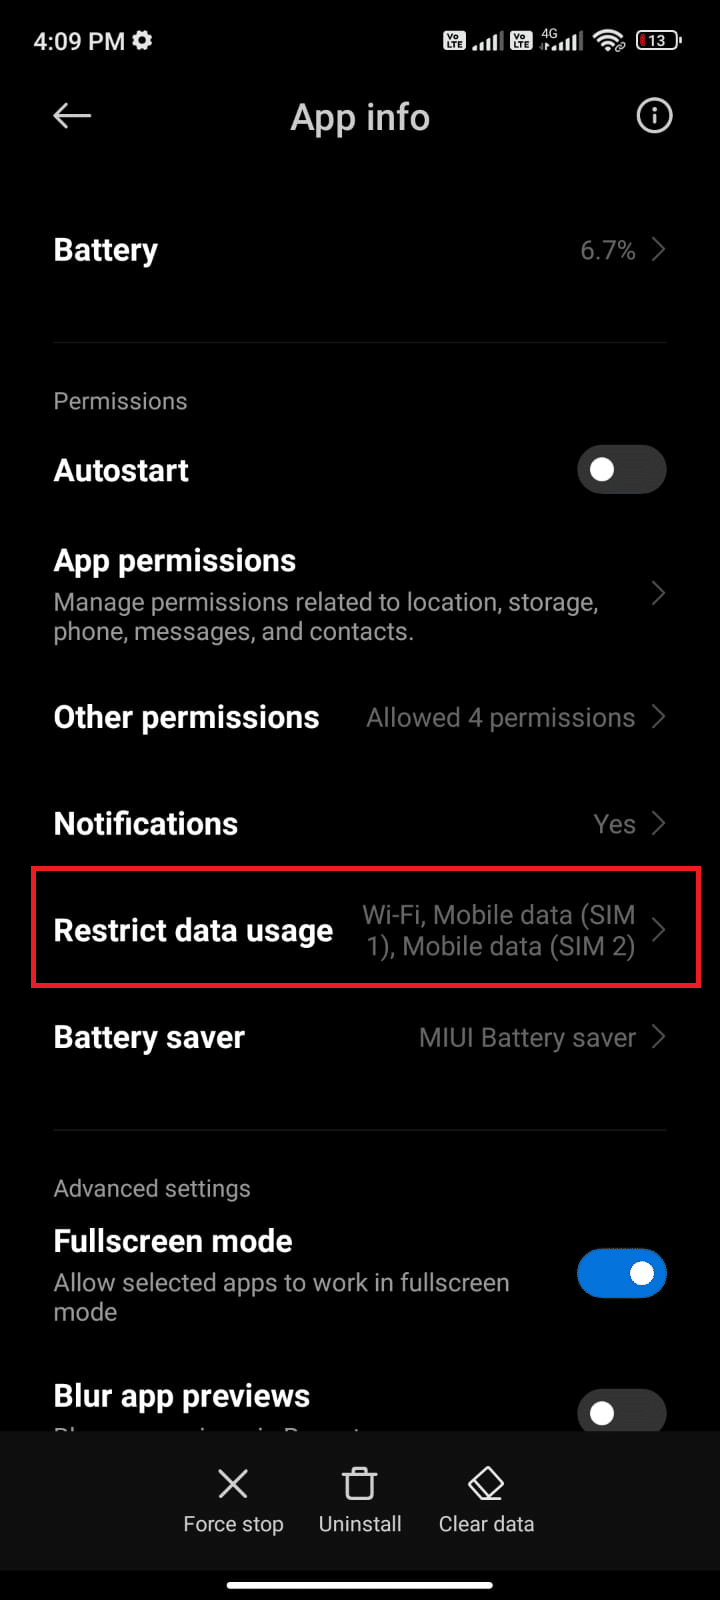 Restricted data usage